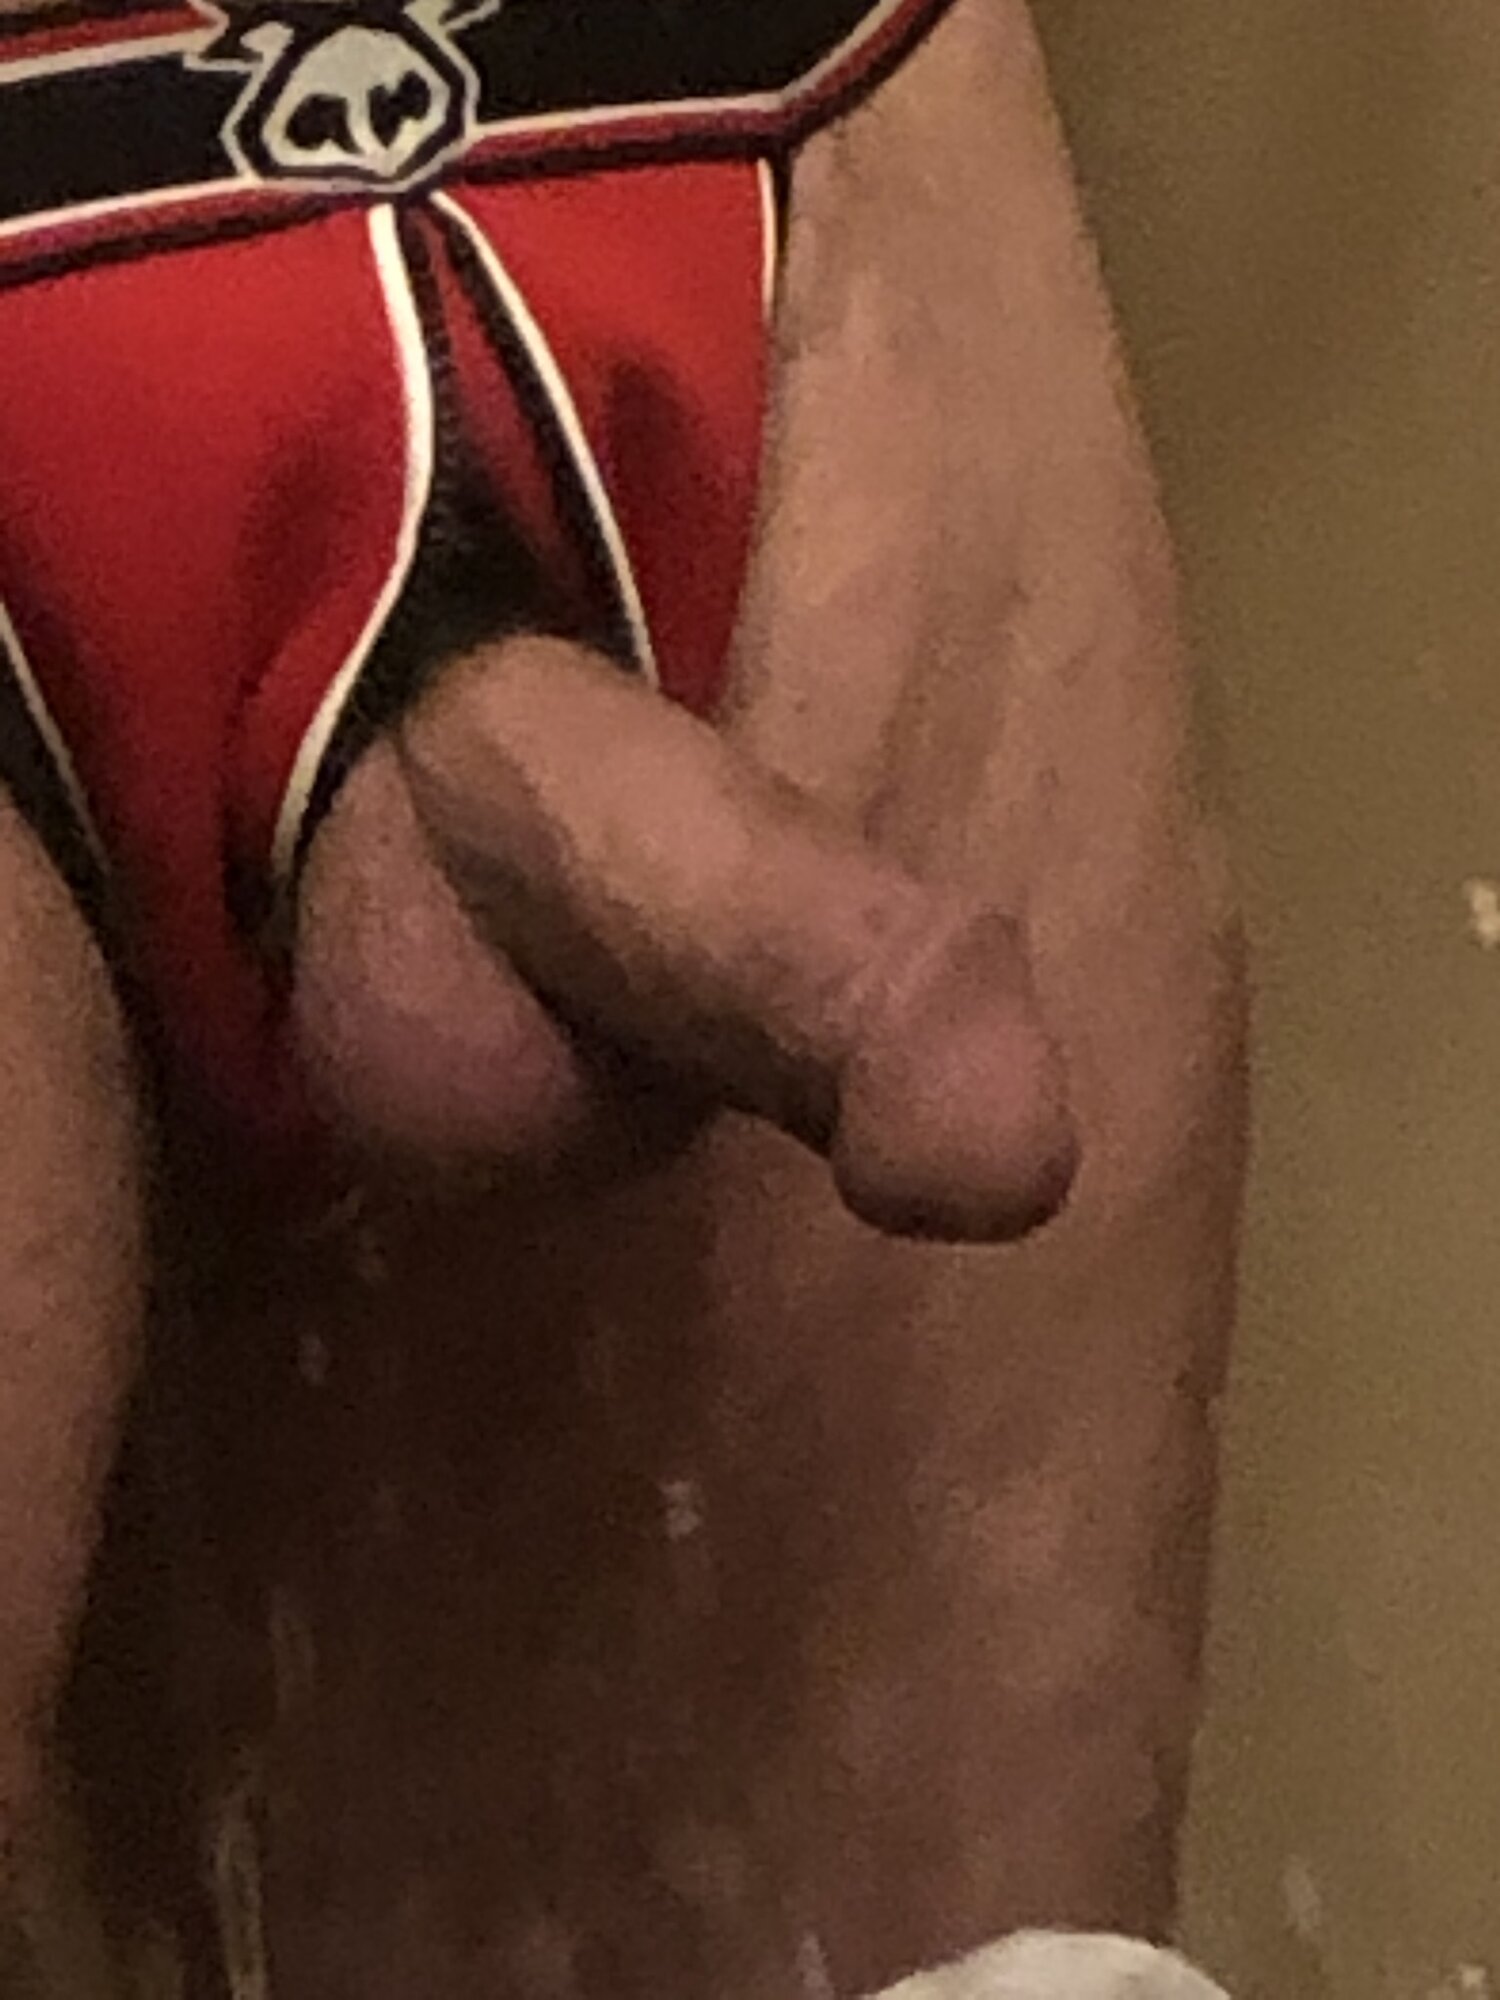 3/4 View of Me In A Zippered Jockstrap